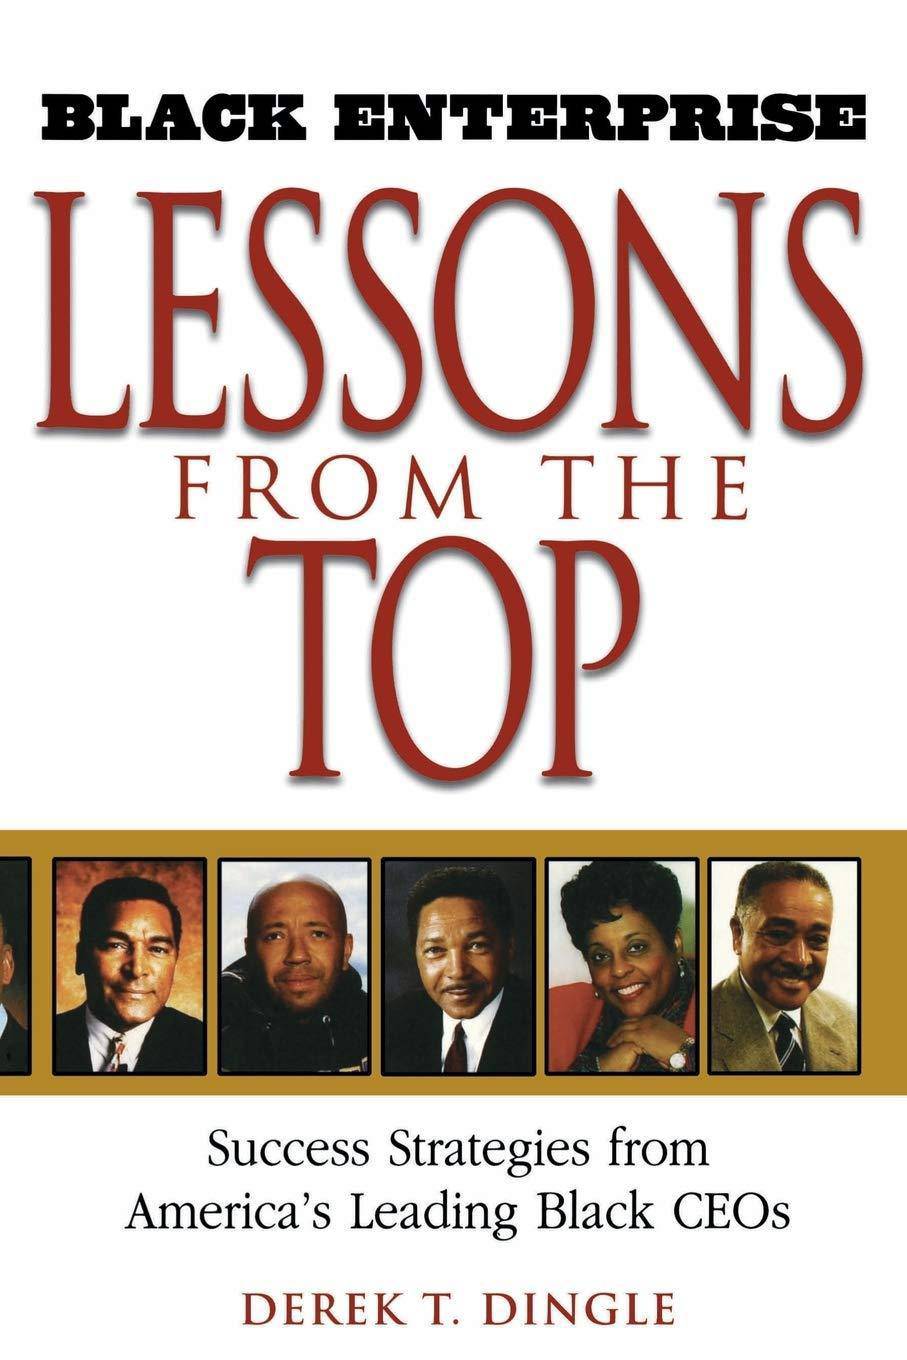 Black Enterprise Lessons from the Top: Success Strategies from A - SureShot Books Publishing LLC